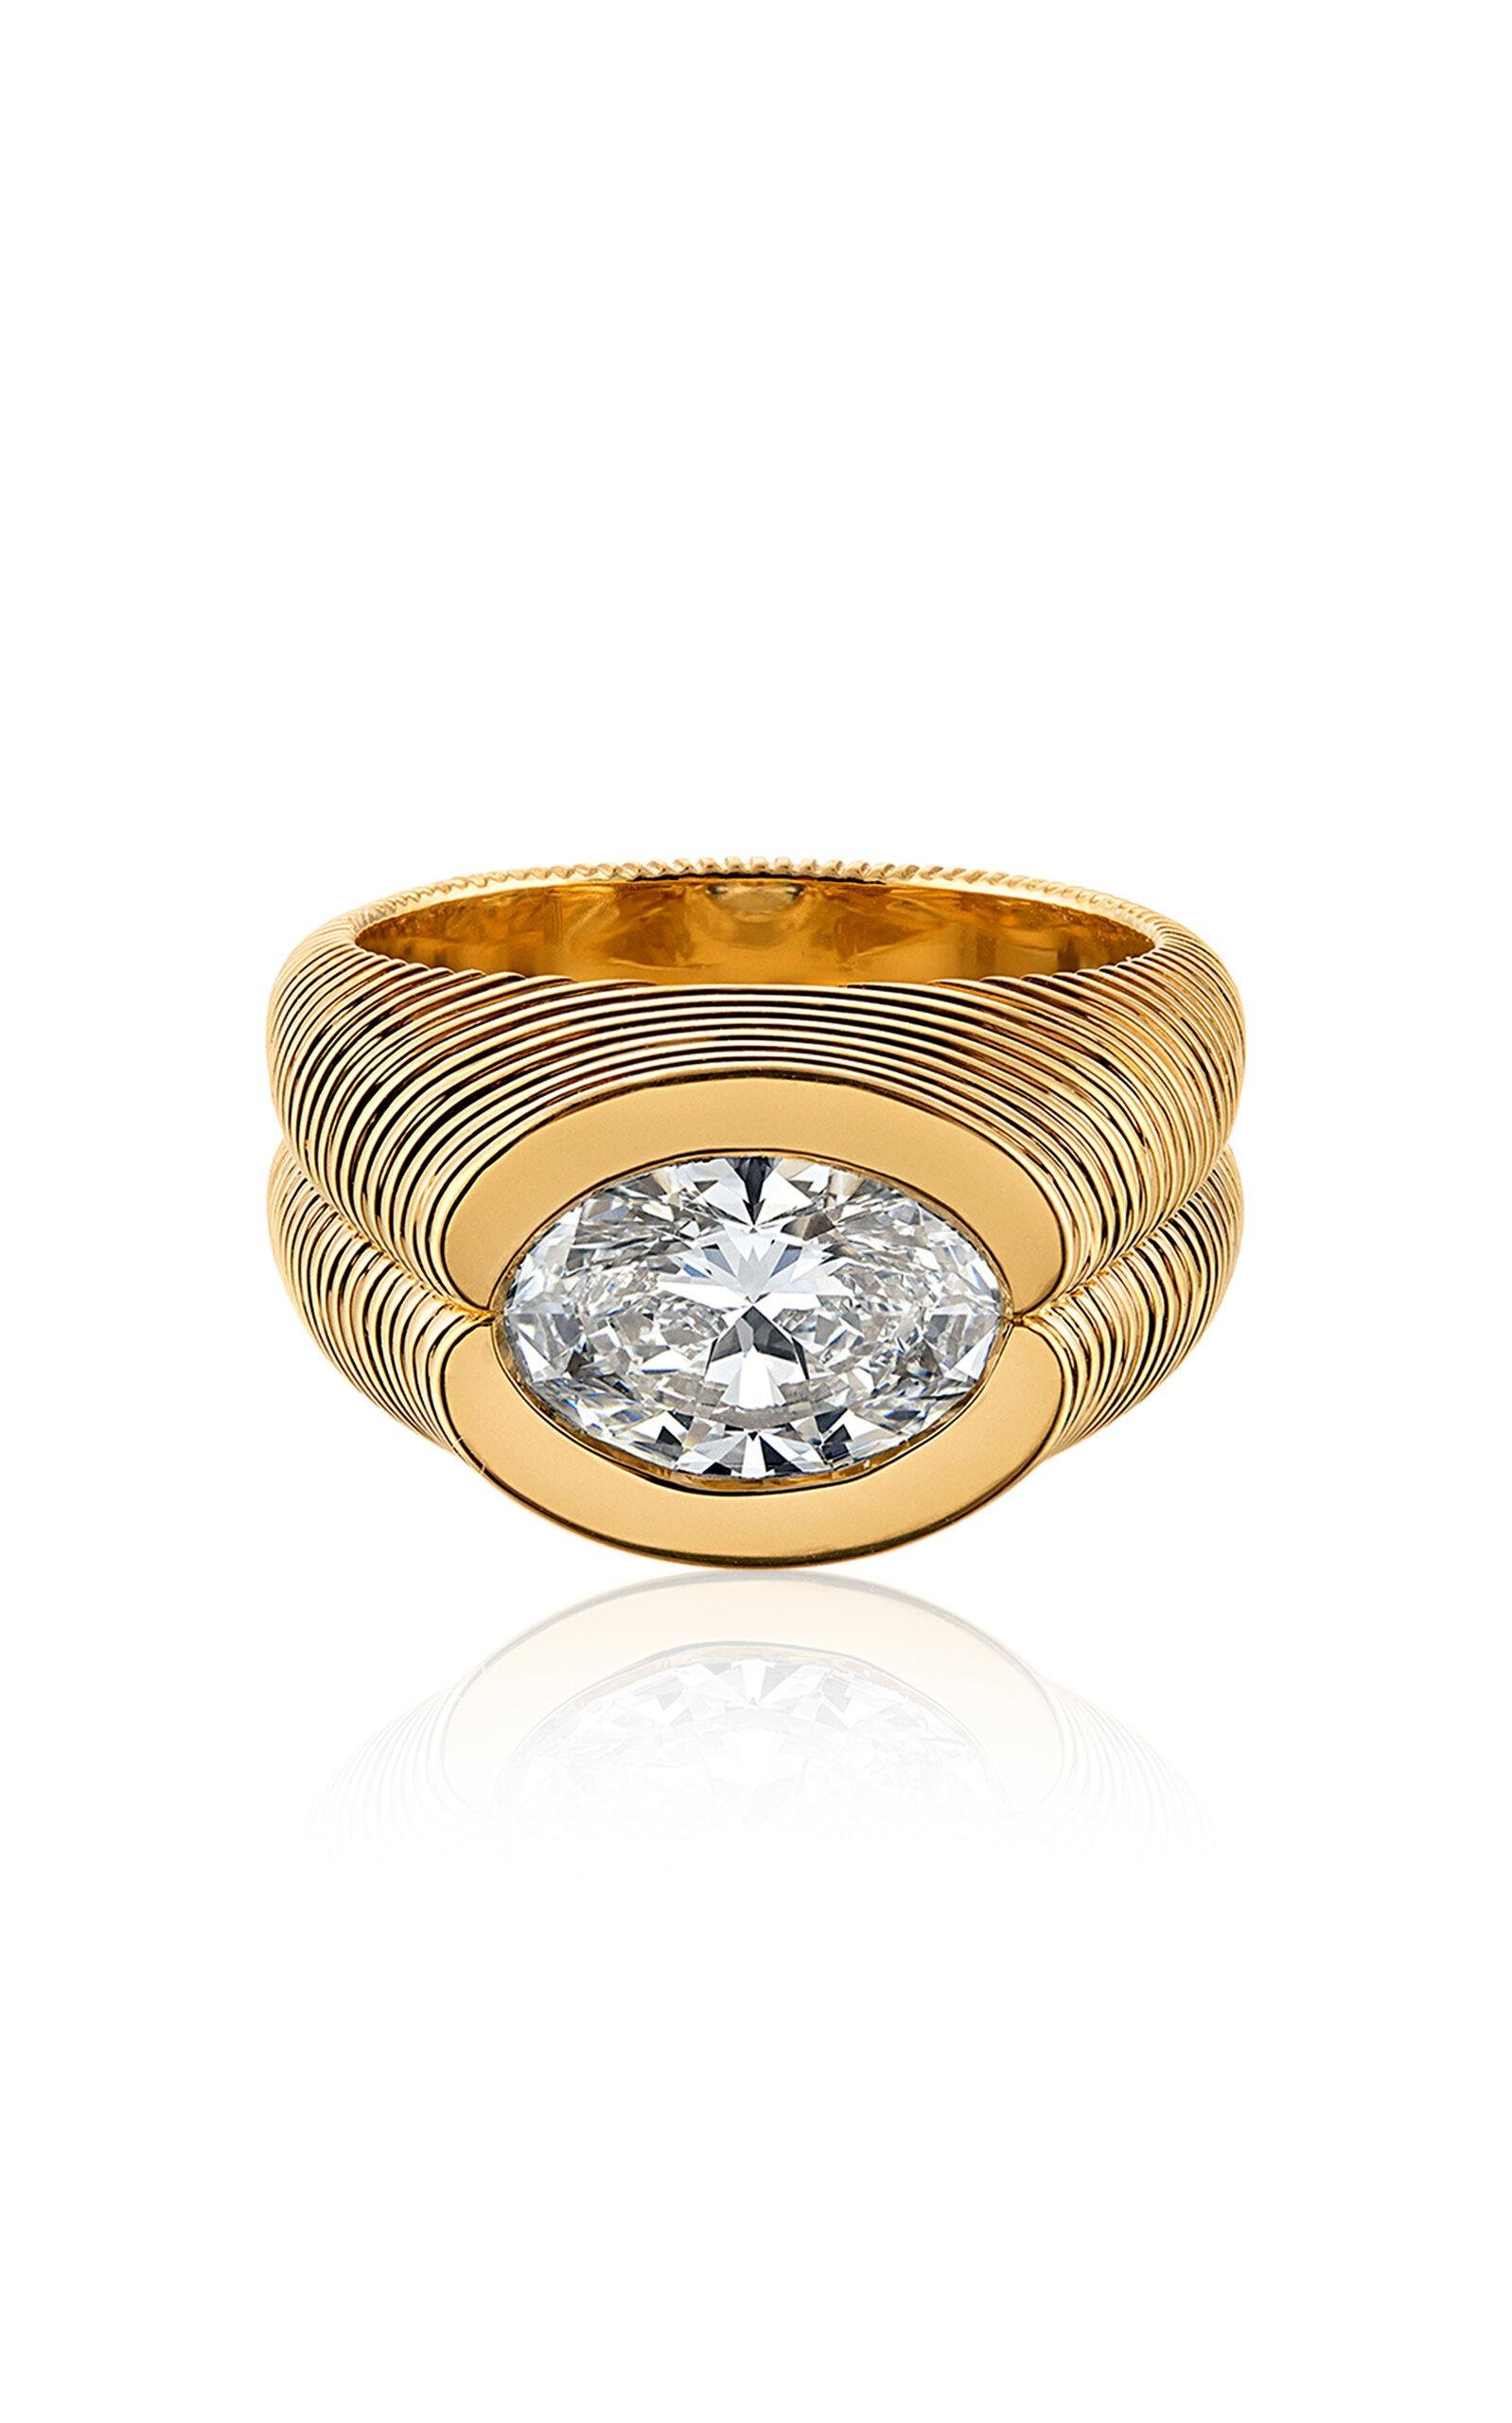 Erede - 18k Yellow Gold Delta Signet Ring - Gold - US 6.5 - Only At Moda Operandi - Gifts For Her by EREDE